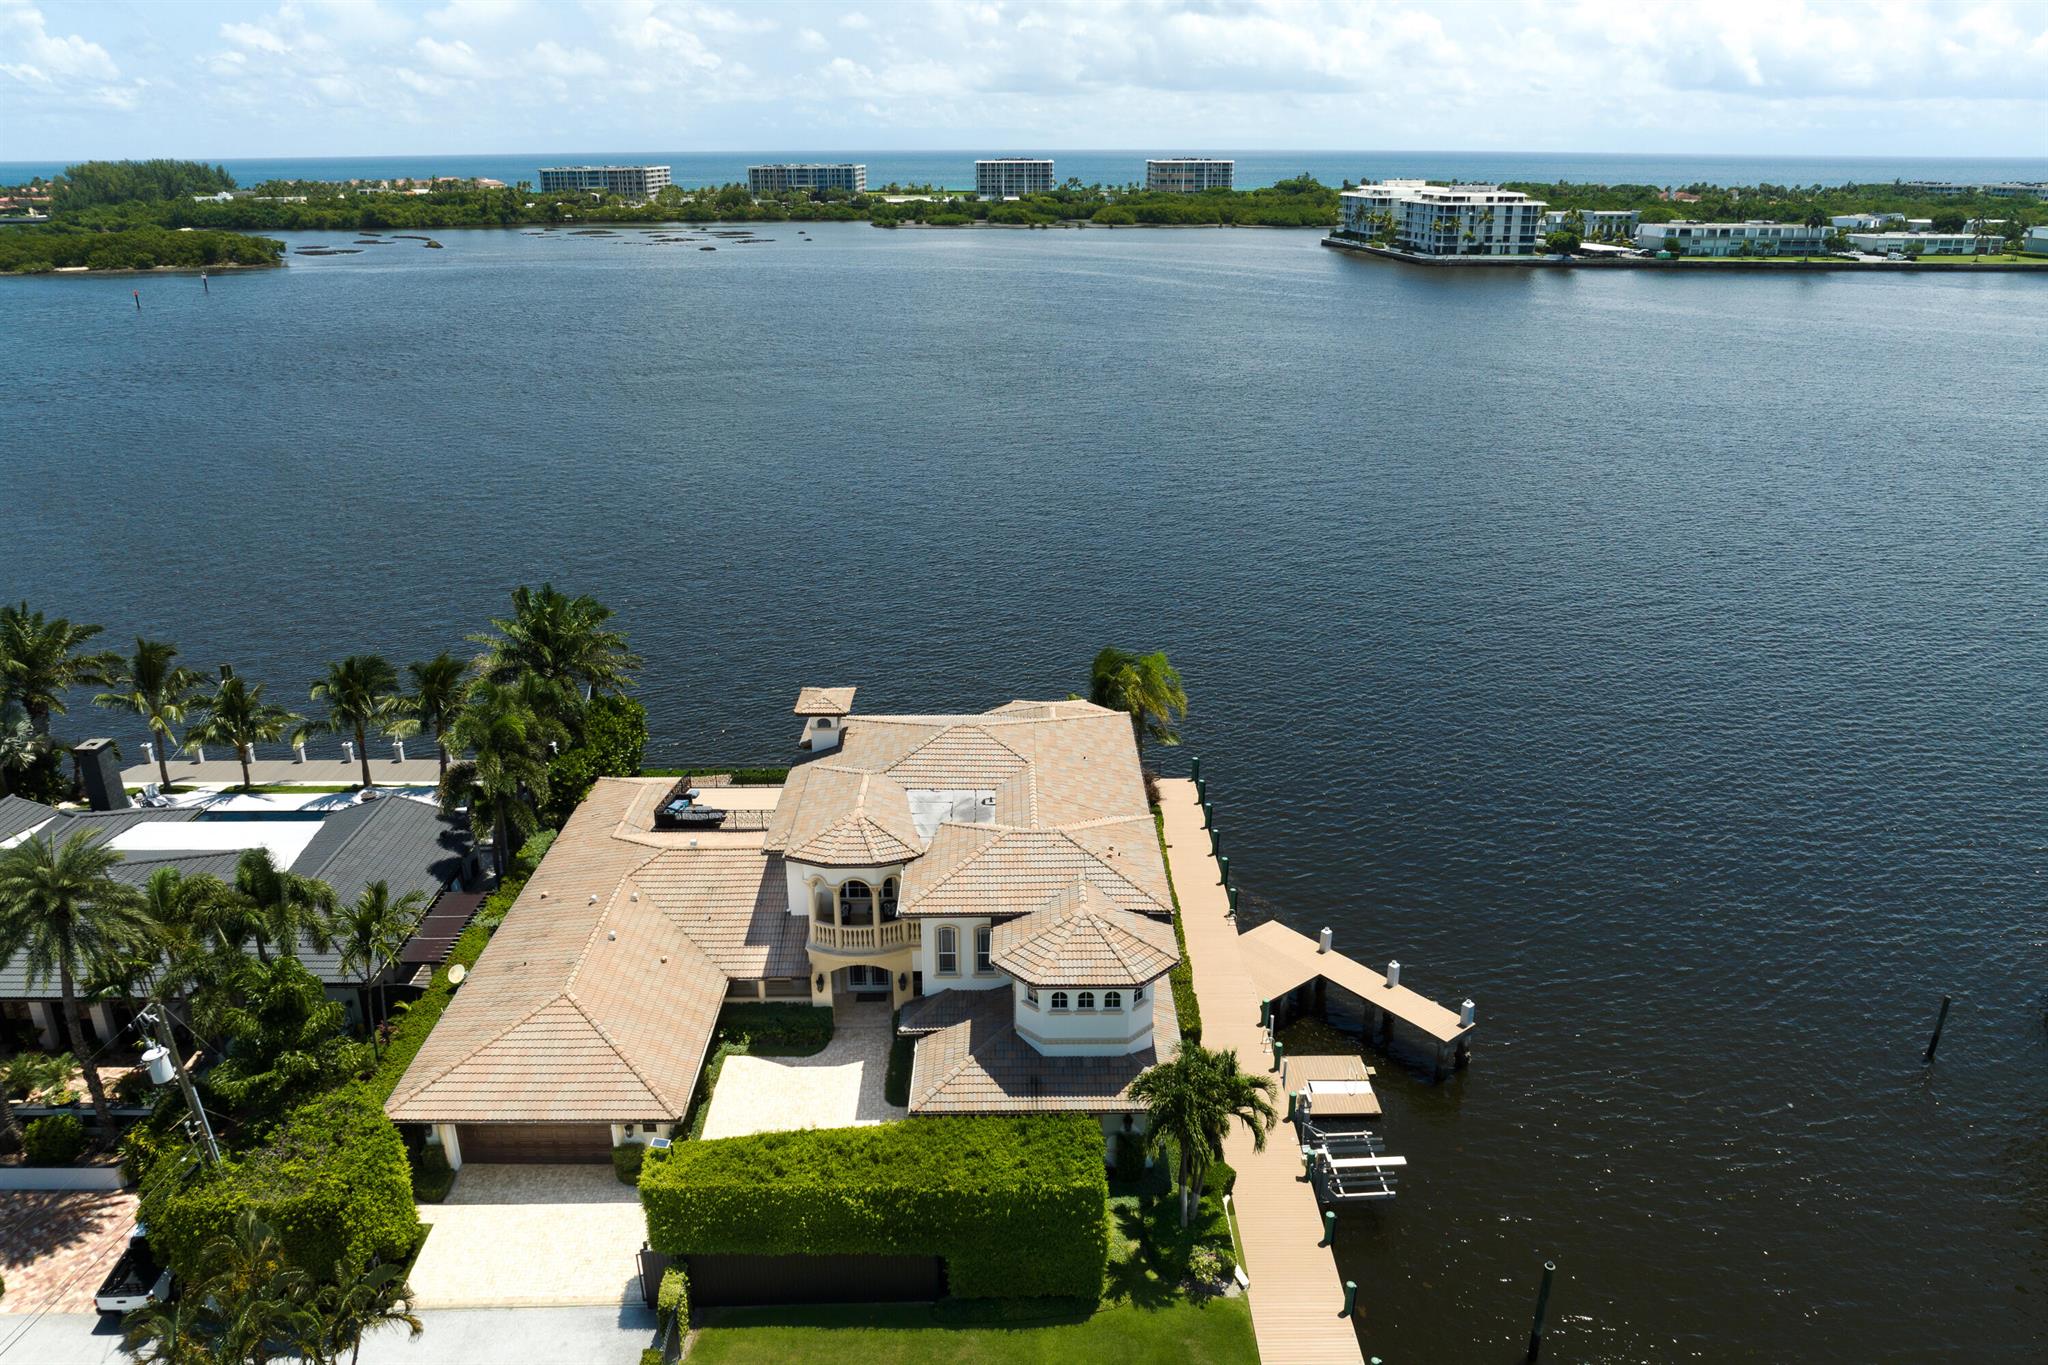 Via Mira Bella-Unequaled in South Florida.  Direct Intracoastal offering 325 ft of waterfront & 200' of dock merely 15 min to Worth Ave, One Flagler & PBI. This estate includes a primary & secondary residence affording 8300+ SF of living space surrounded on two sides by water. The Primary residence features a 17' backlit quartzite island, water's edge dining & living areas, a 5-room owners suite with panoramic vista's, & an ocean-facing rooftop terrace! Waterfront kitchens & great rooms are surpassed only by the 300' of coastal loggia's & walkways connecting the dwellings. Reimagined, the secondary residence offers its own waterfront living areas, kitchen & pool. This property offers unprecedented security & privacy & exclusive tax incentives to qualified buyers. Inquires encouraged